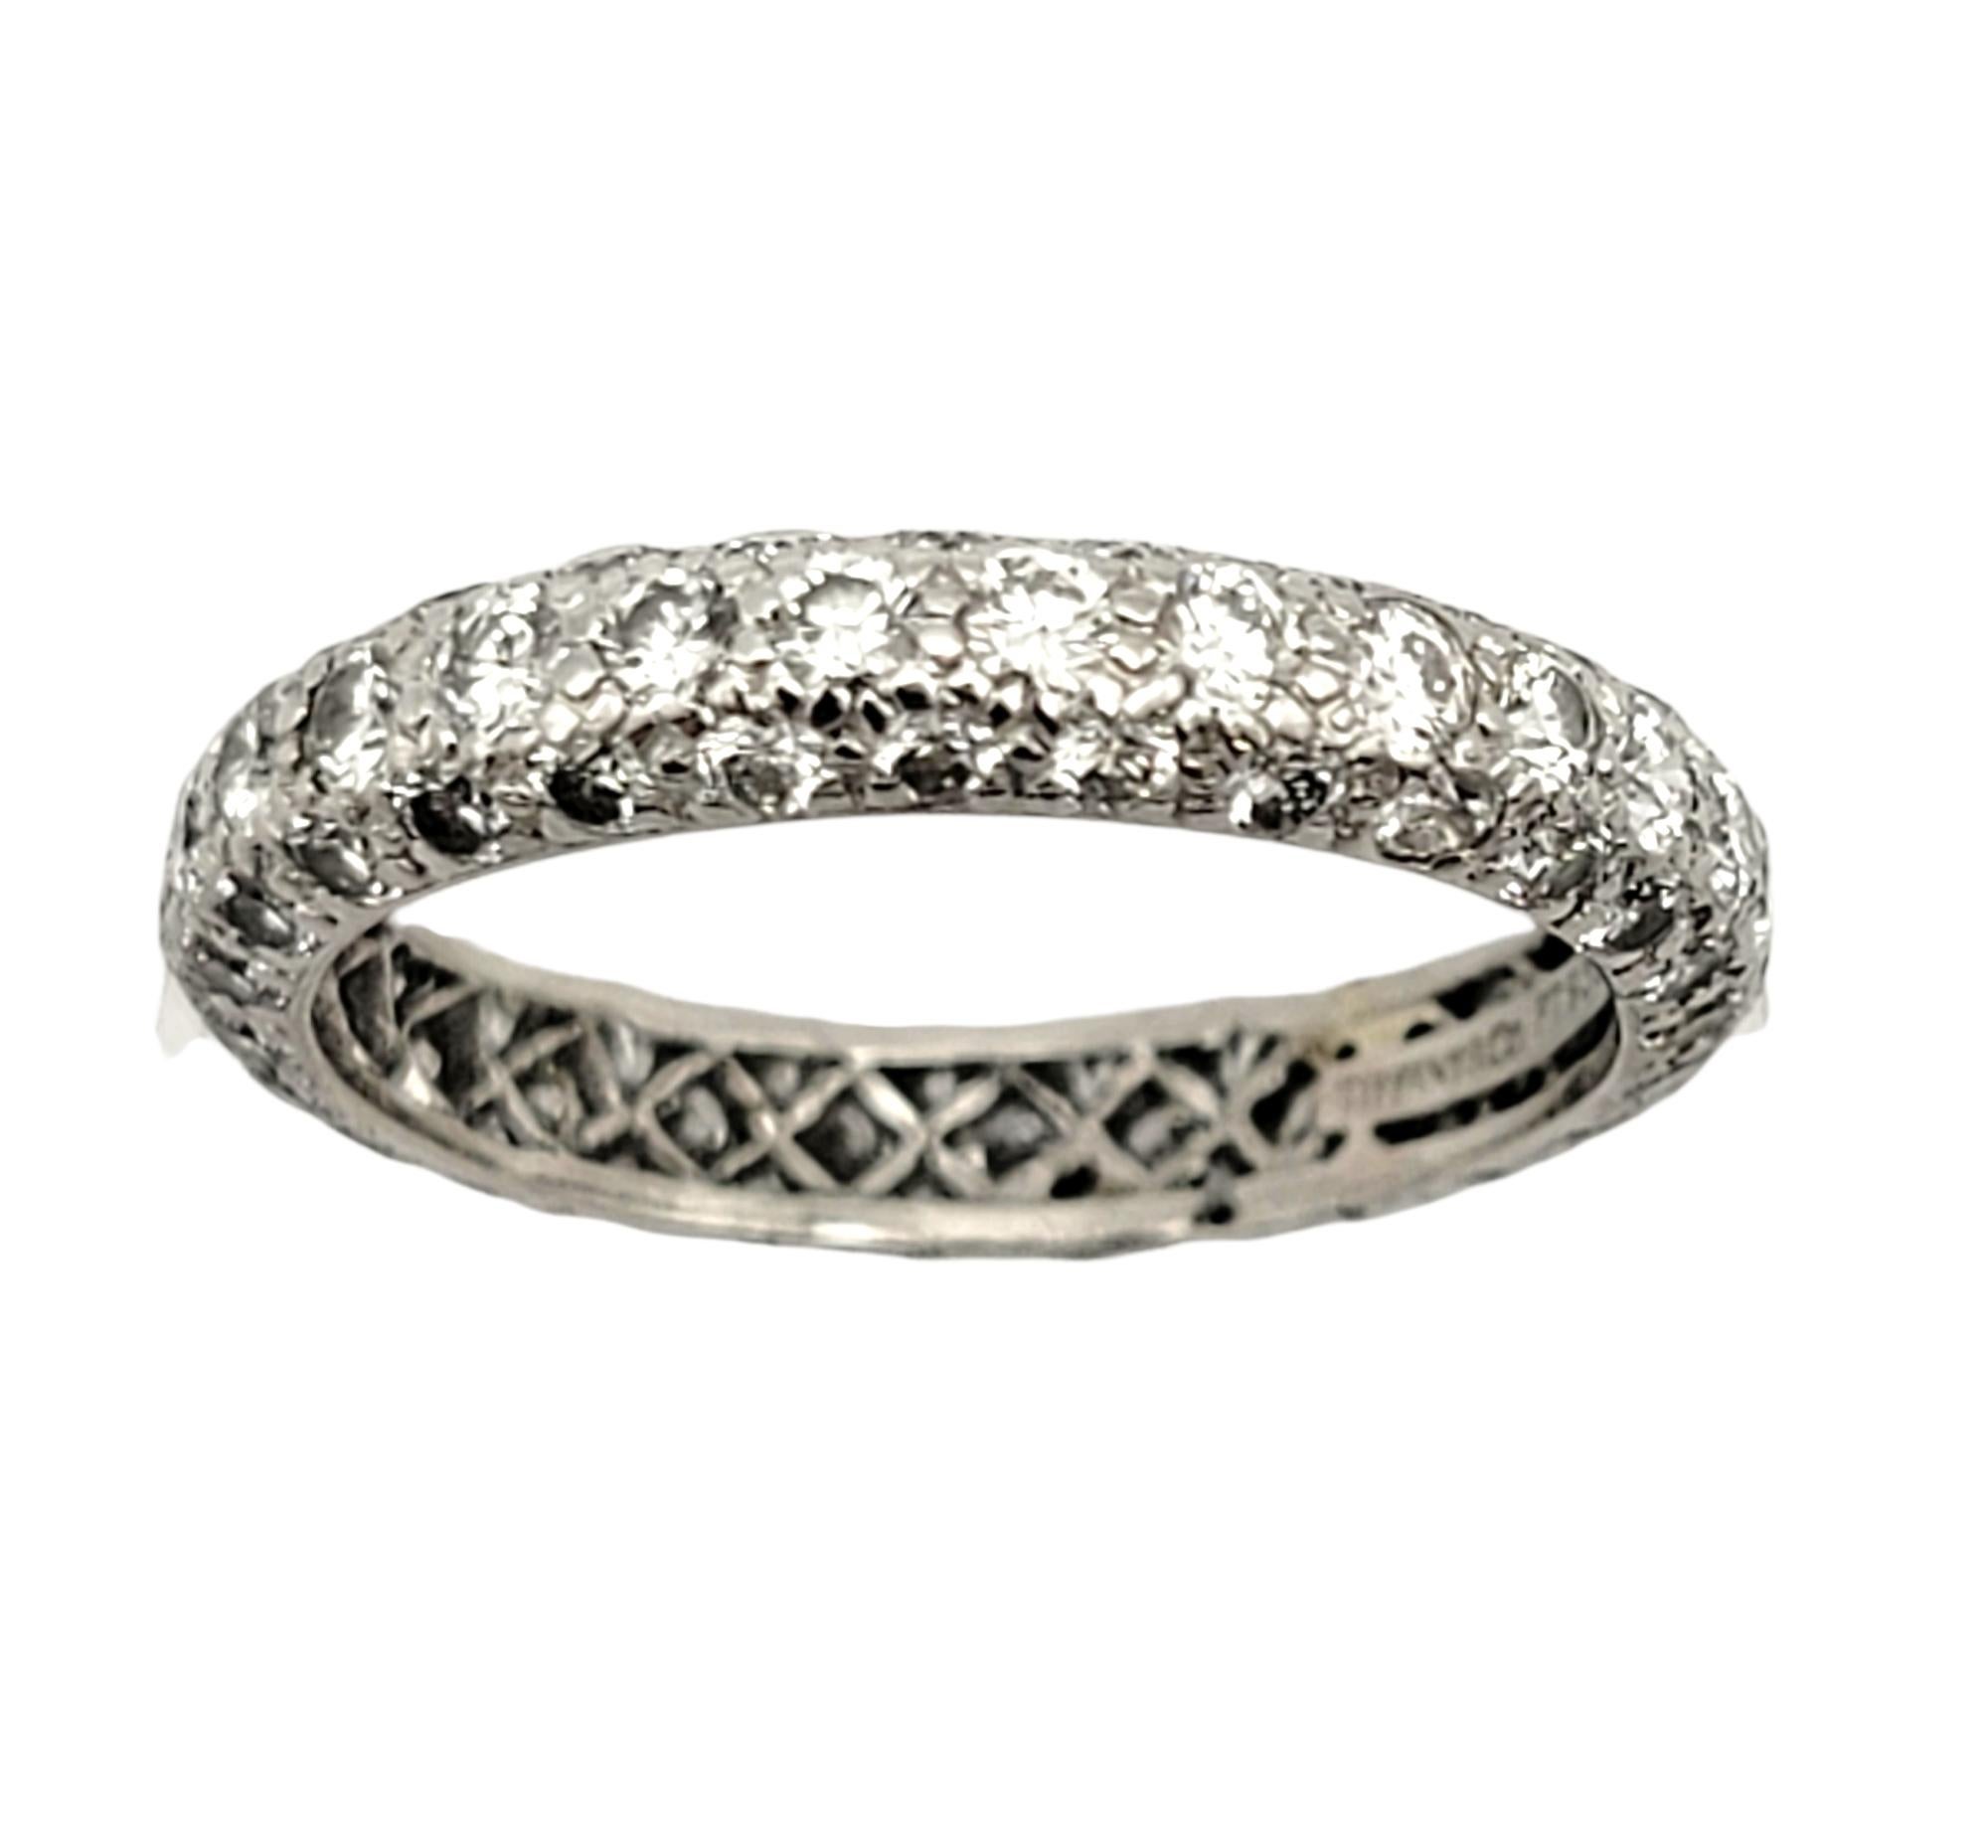 Tiffany & Co. Etoile Pave Diamond Eternity Band Ring Platinum 1.76 Carats Total In Good Condition In Scottsdale, AZ